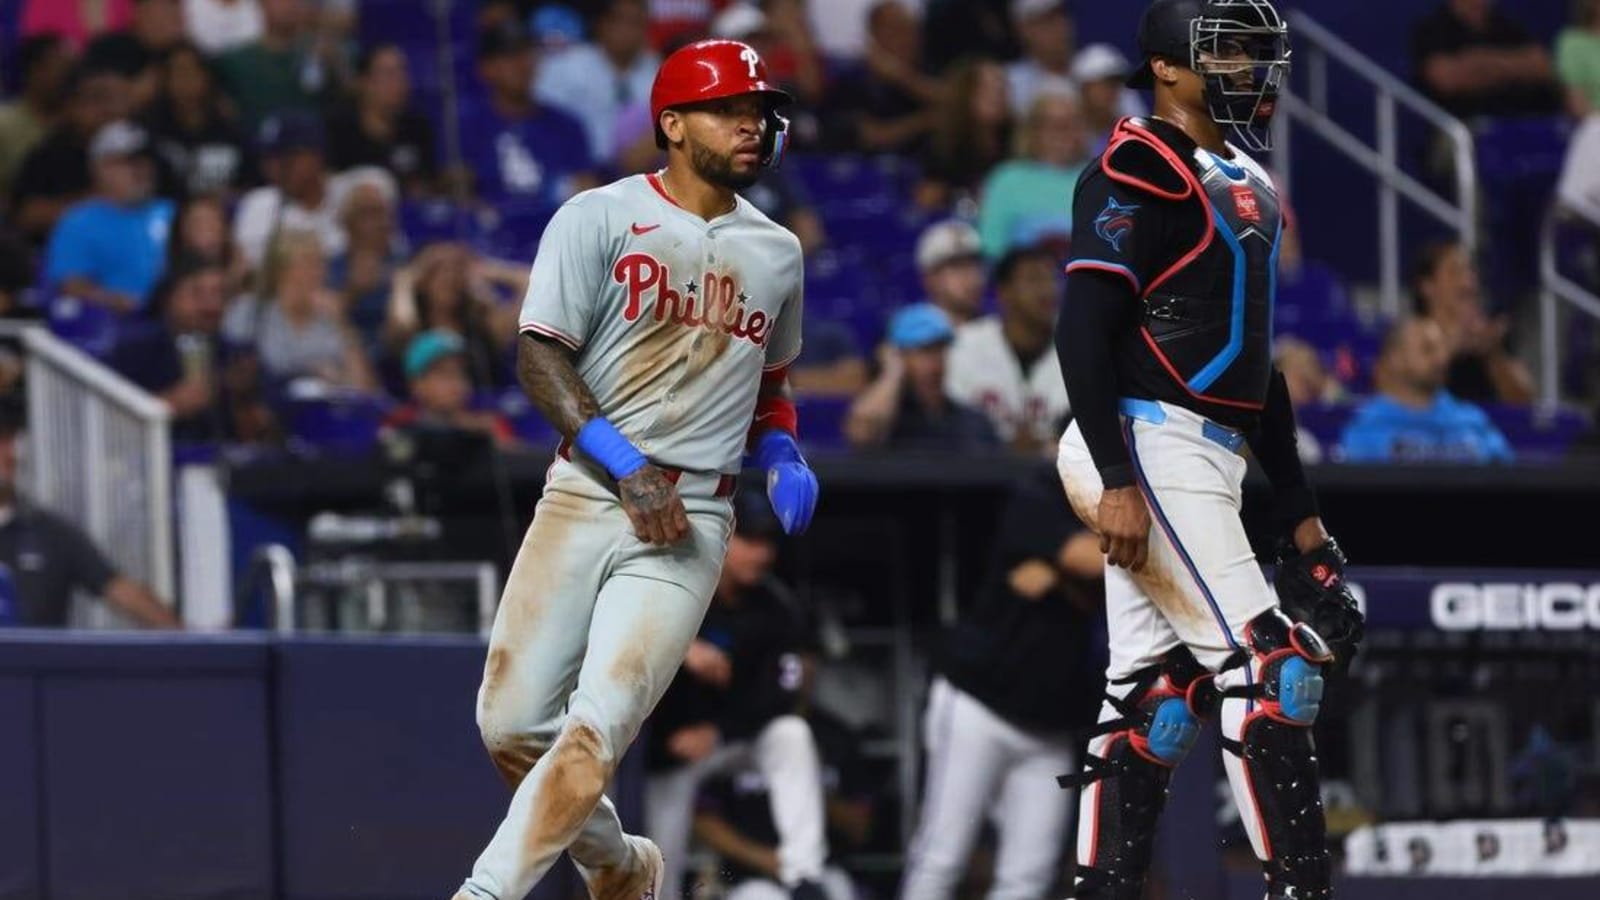 Ranger Suarez strikes out 9 as Phillies blank Marlins